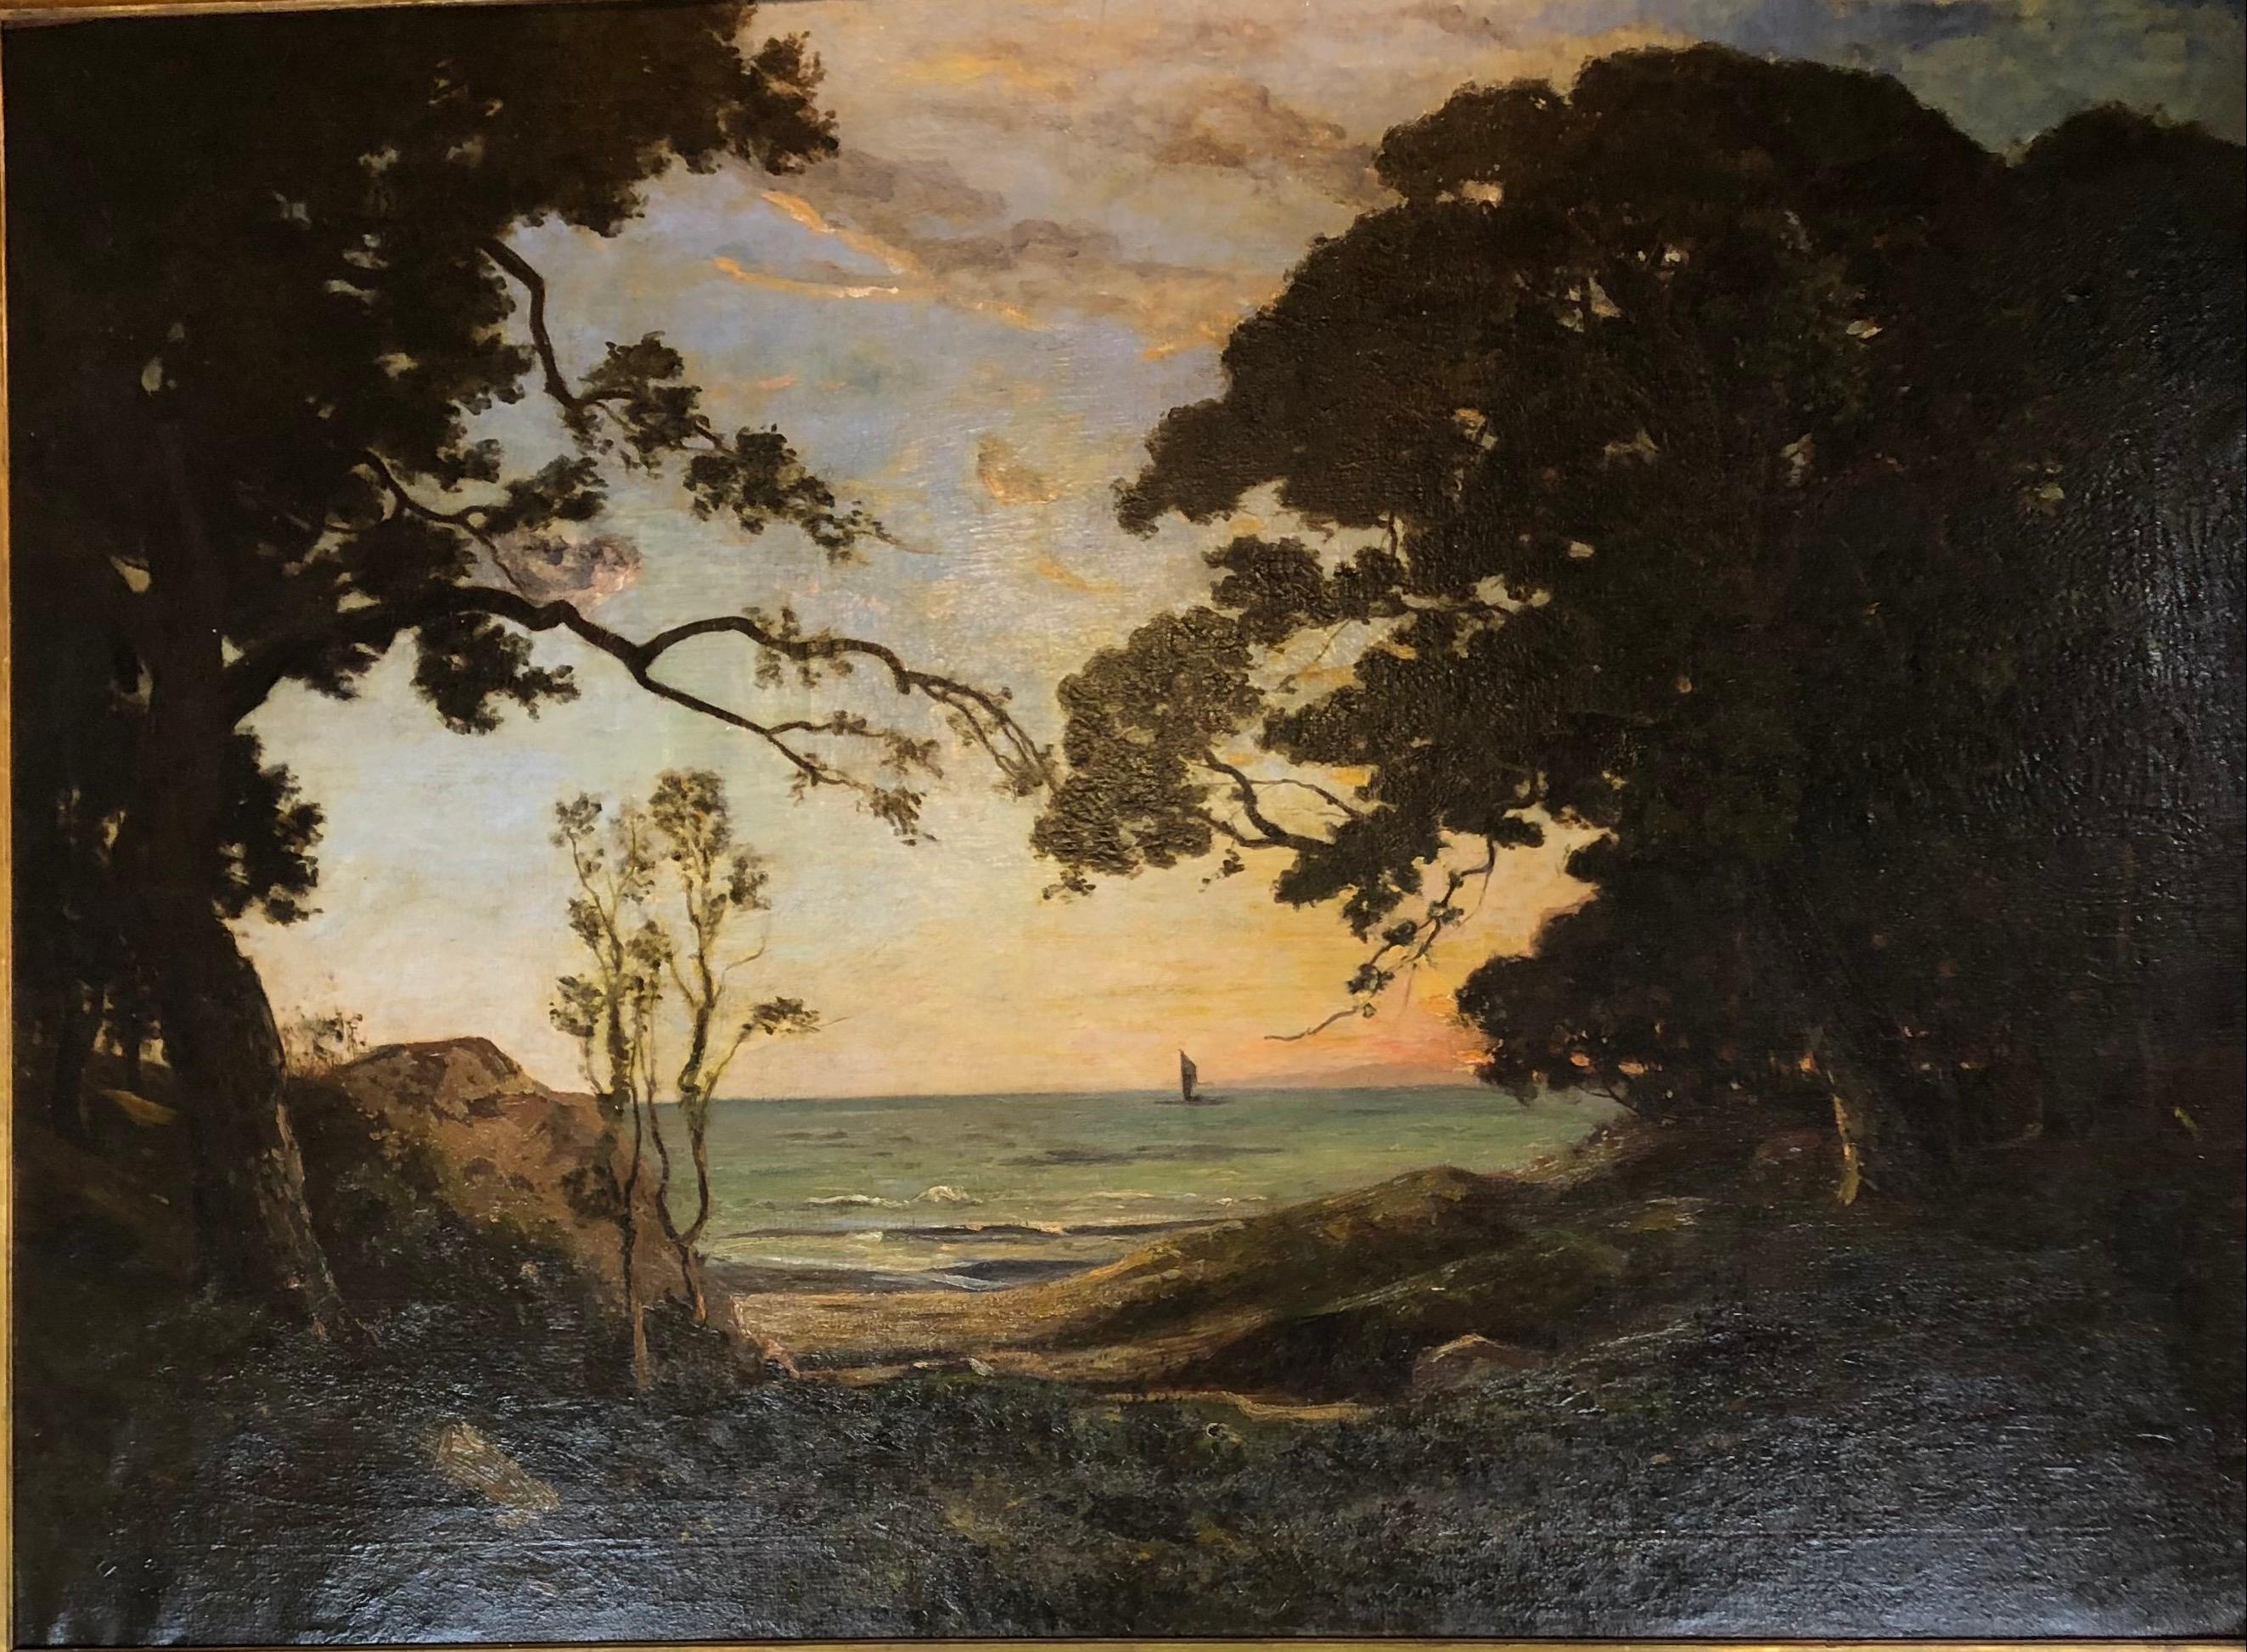 A fine original seascape painting in its original hand carved gilt wood frame.
This large work of art is painted on canvas and has recently been cleaned to display its delightful details, circa 1890.  

Signed, ALFRED COUTURAUD
Alfred Couturaud,